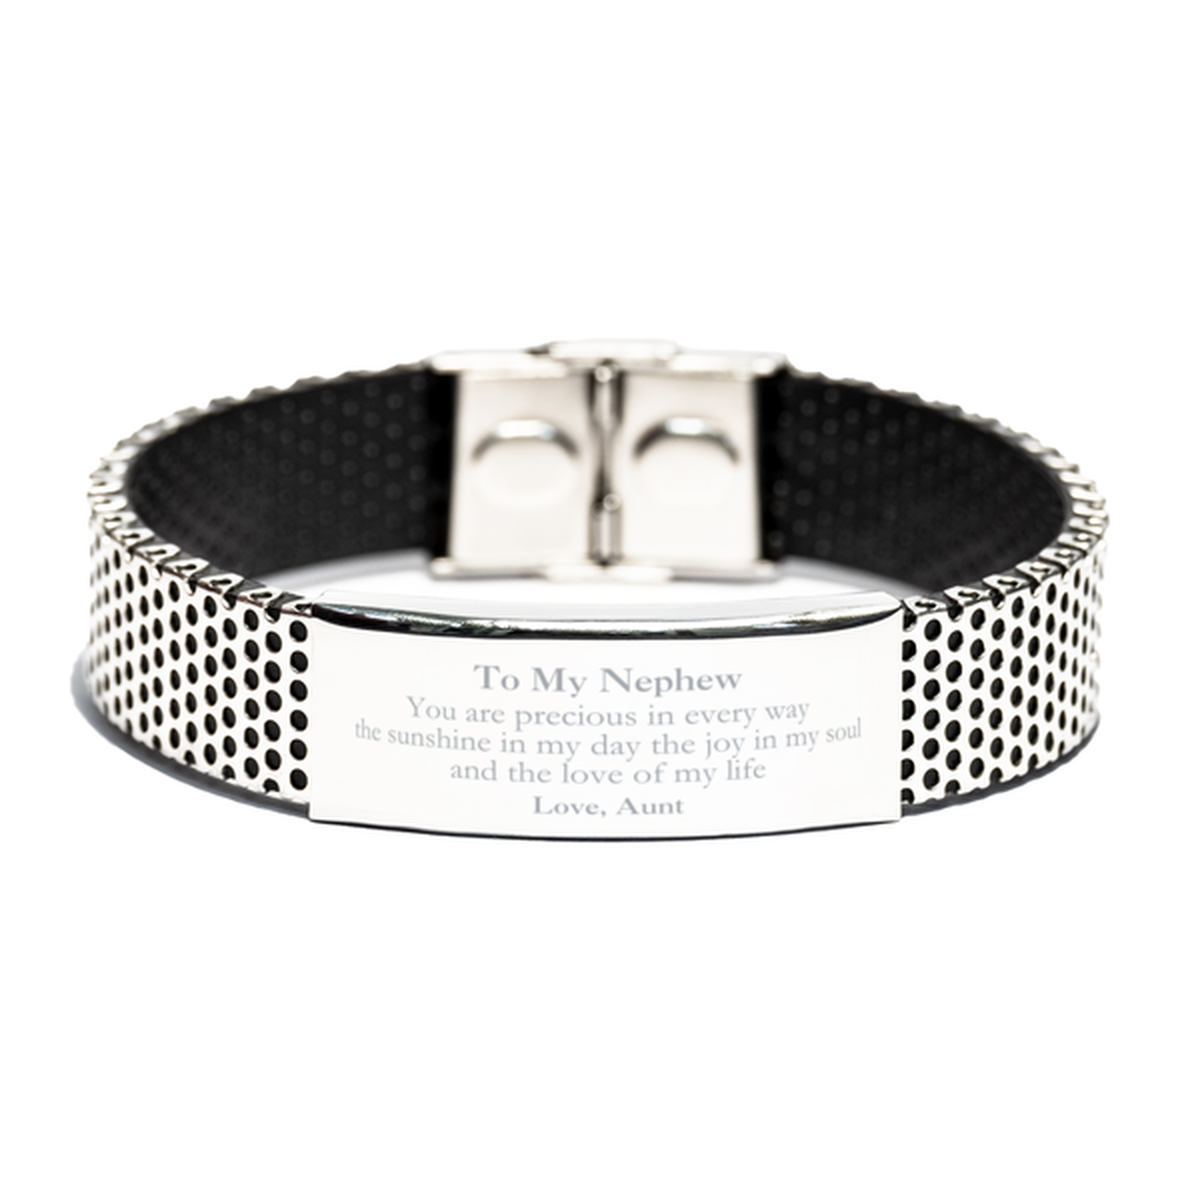 Graduation Gifts for Nephew Stainless Steel Bracelet Present from Aunt, Christmas Nephew Birthday Gifts Nephew You are precious in every way the sunshine in my day. Love, Aunt